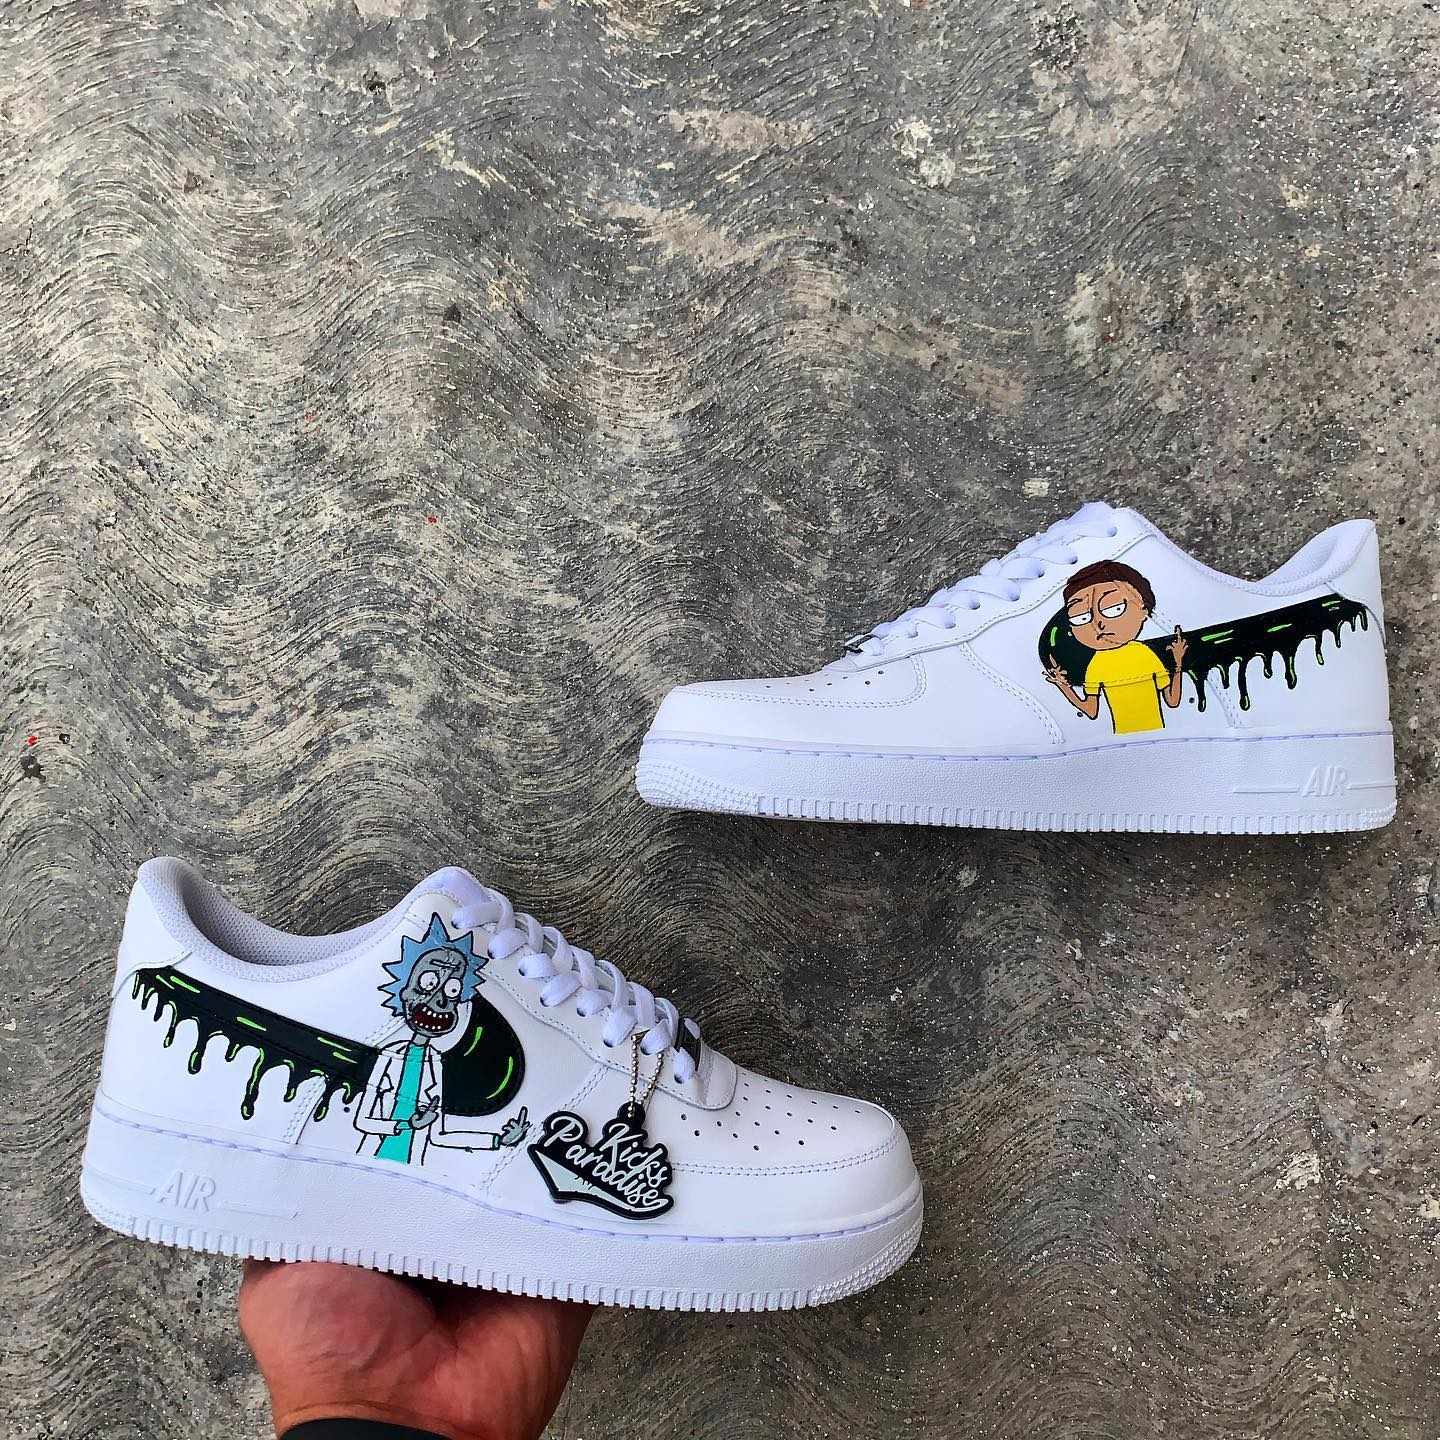 rick and morty black air force 1